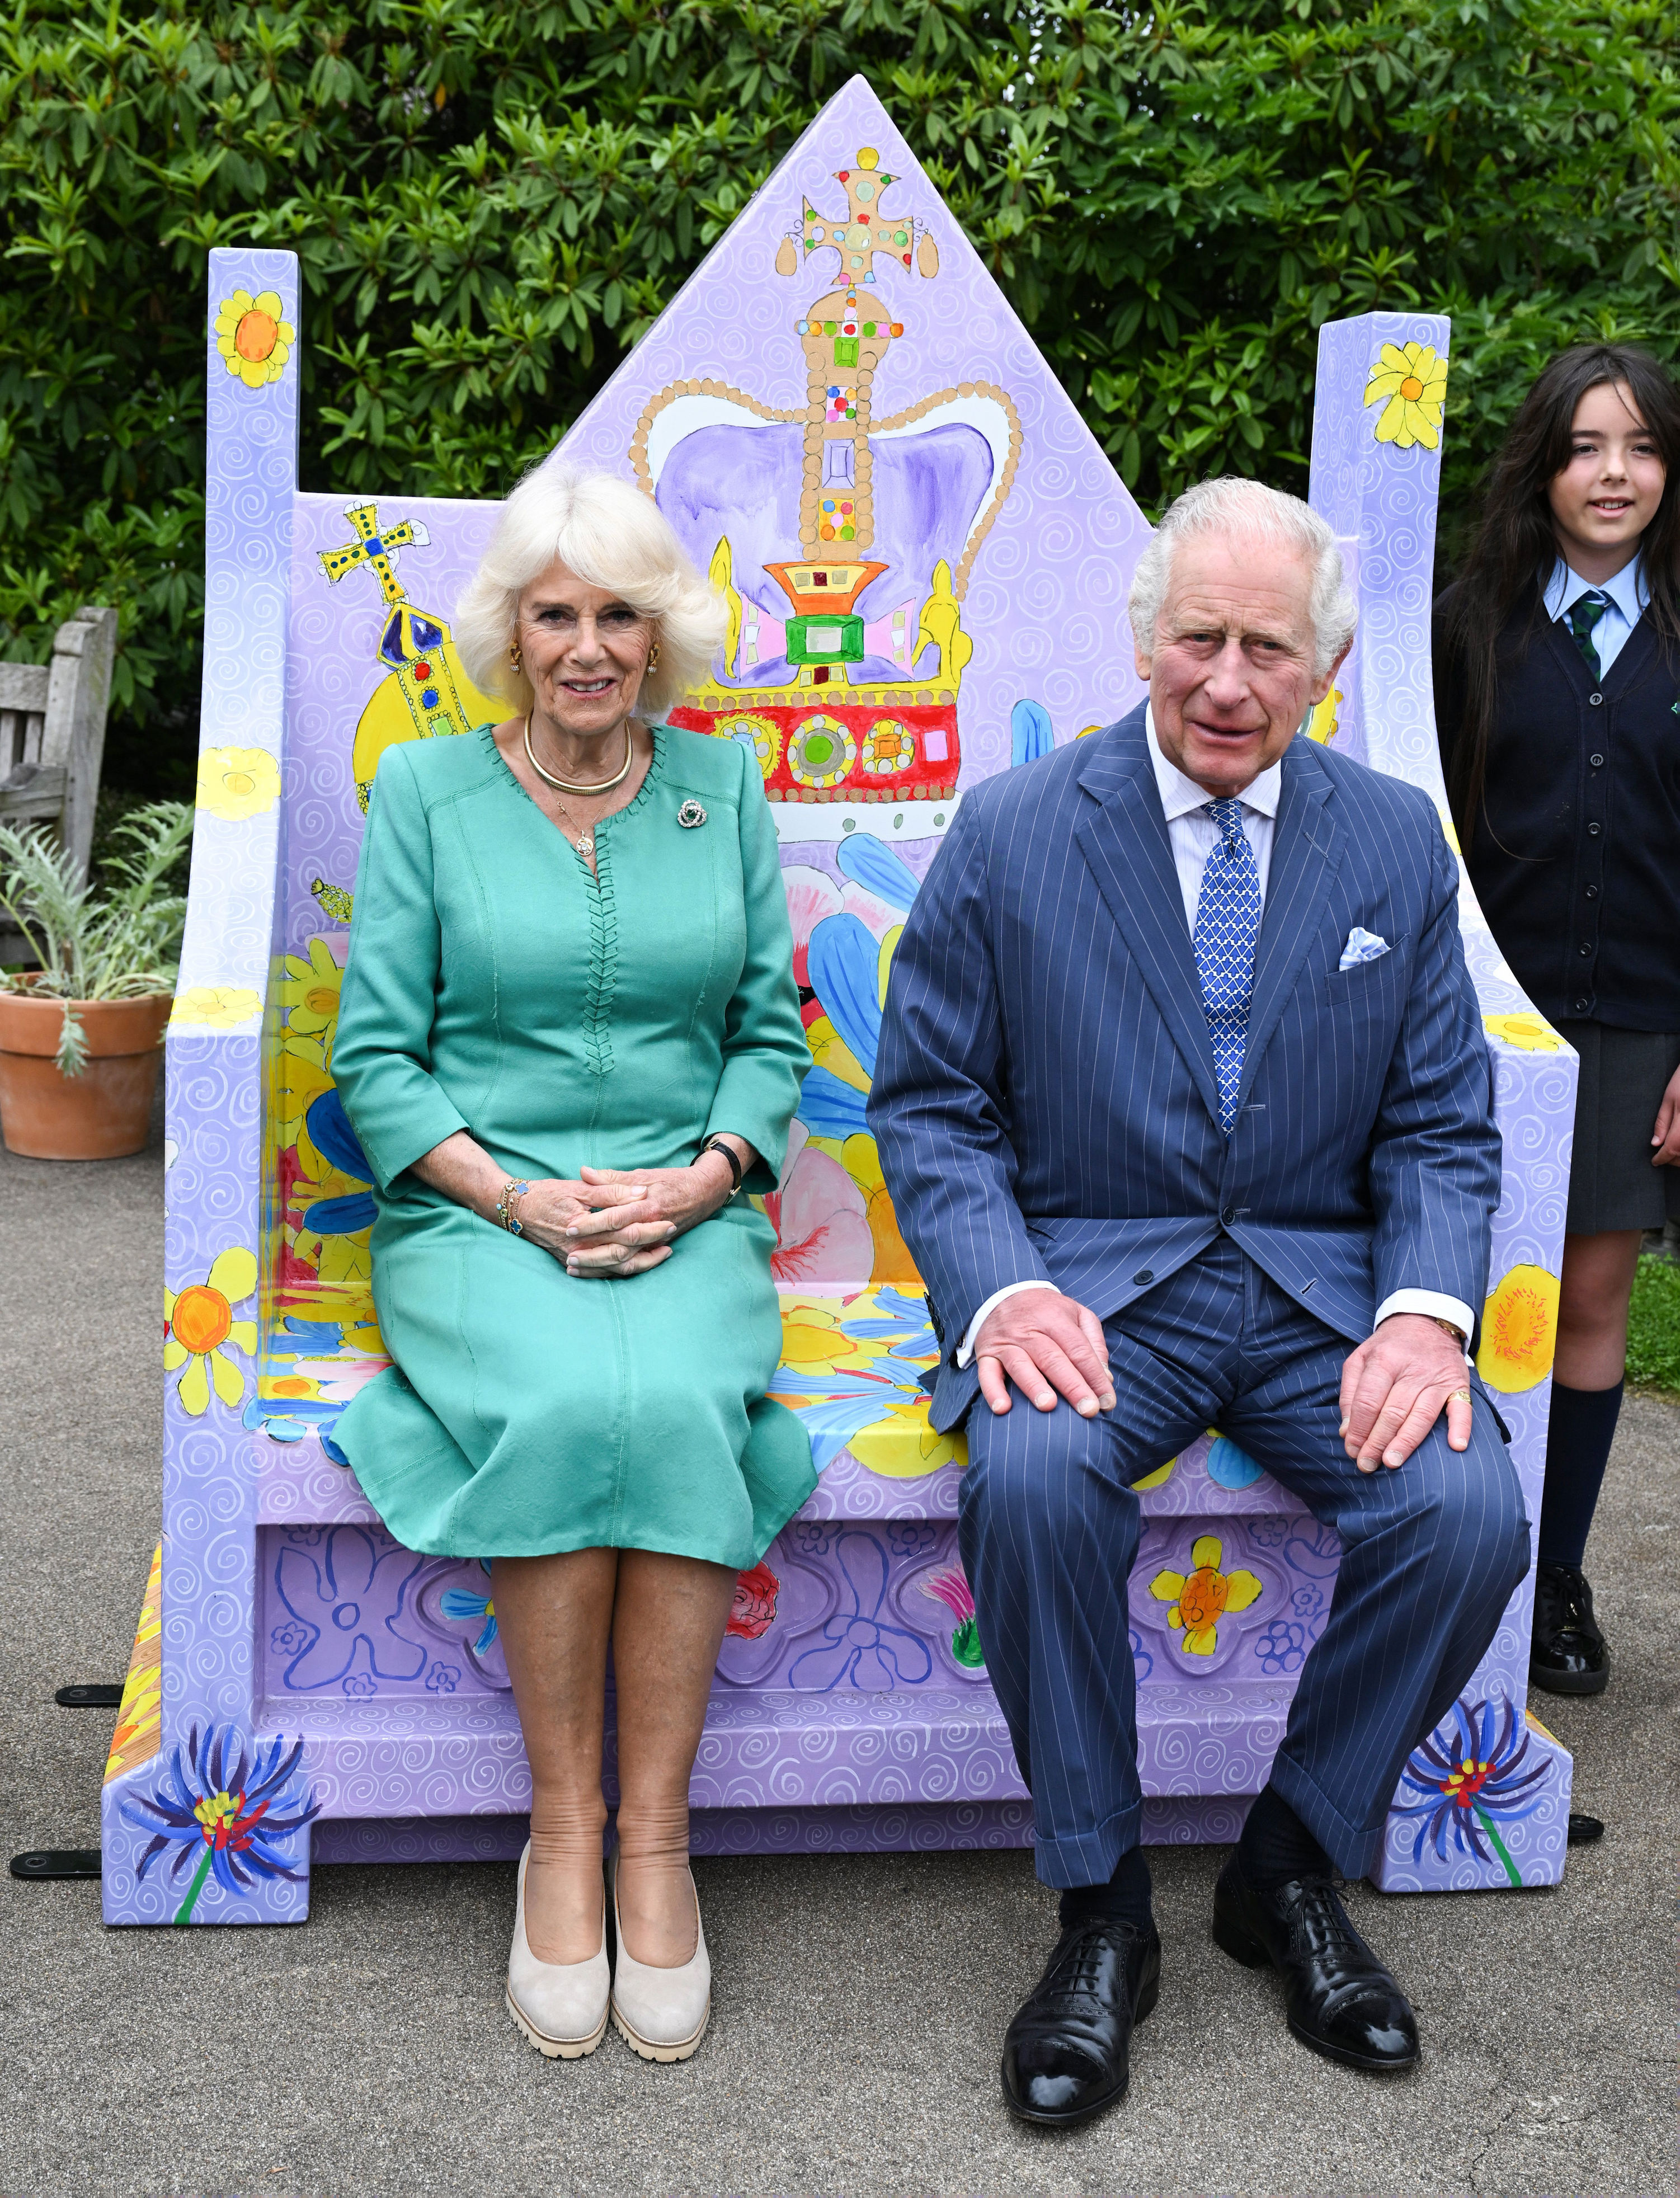 <p>King Charles III and Queen Camilla sat on a coronation bench during a visit to Hillsborough Castle -- their official royal residence in Northern Ireland -- on day one of their two-day visit to the British nation on May 24, 2023. There, they met pupils from a local primary school who took part in a Historic Royal Palaces competition to design coronation benches.</p>